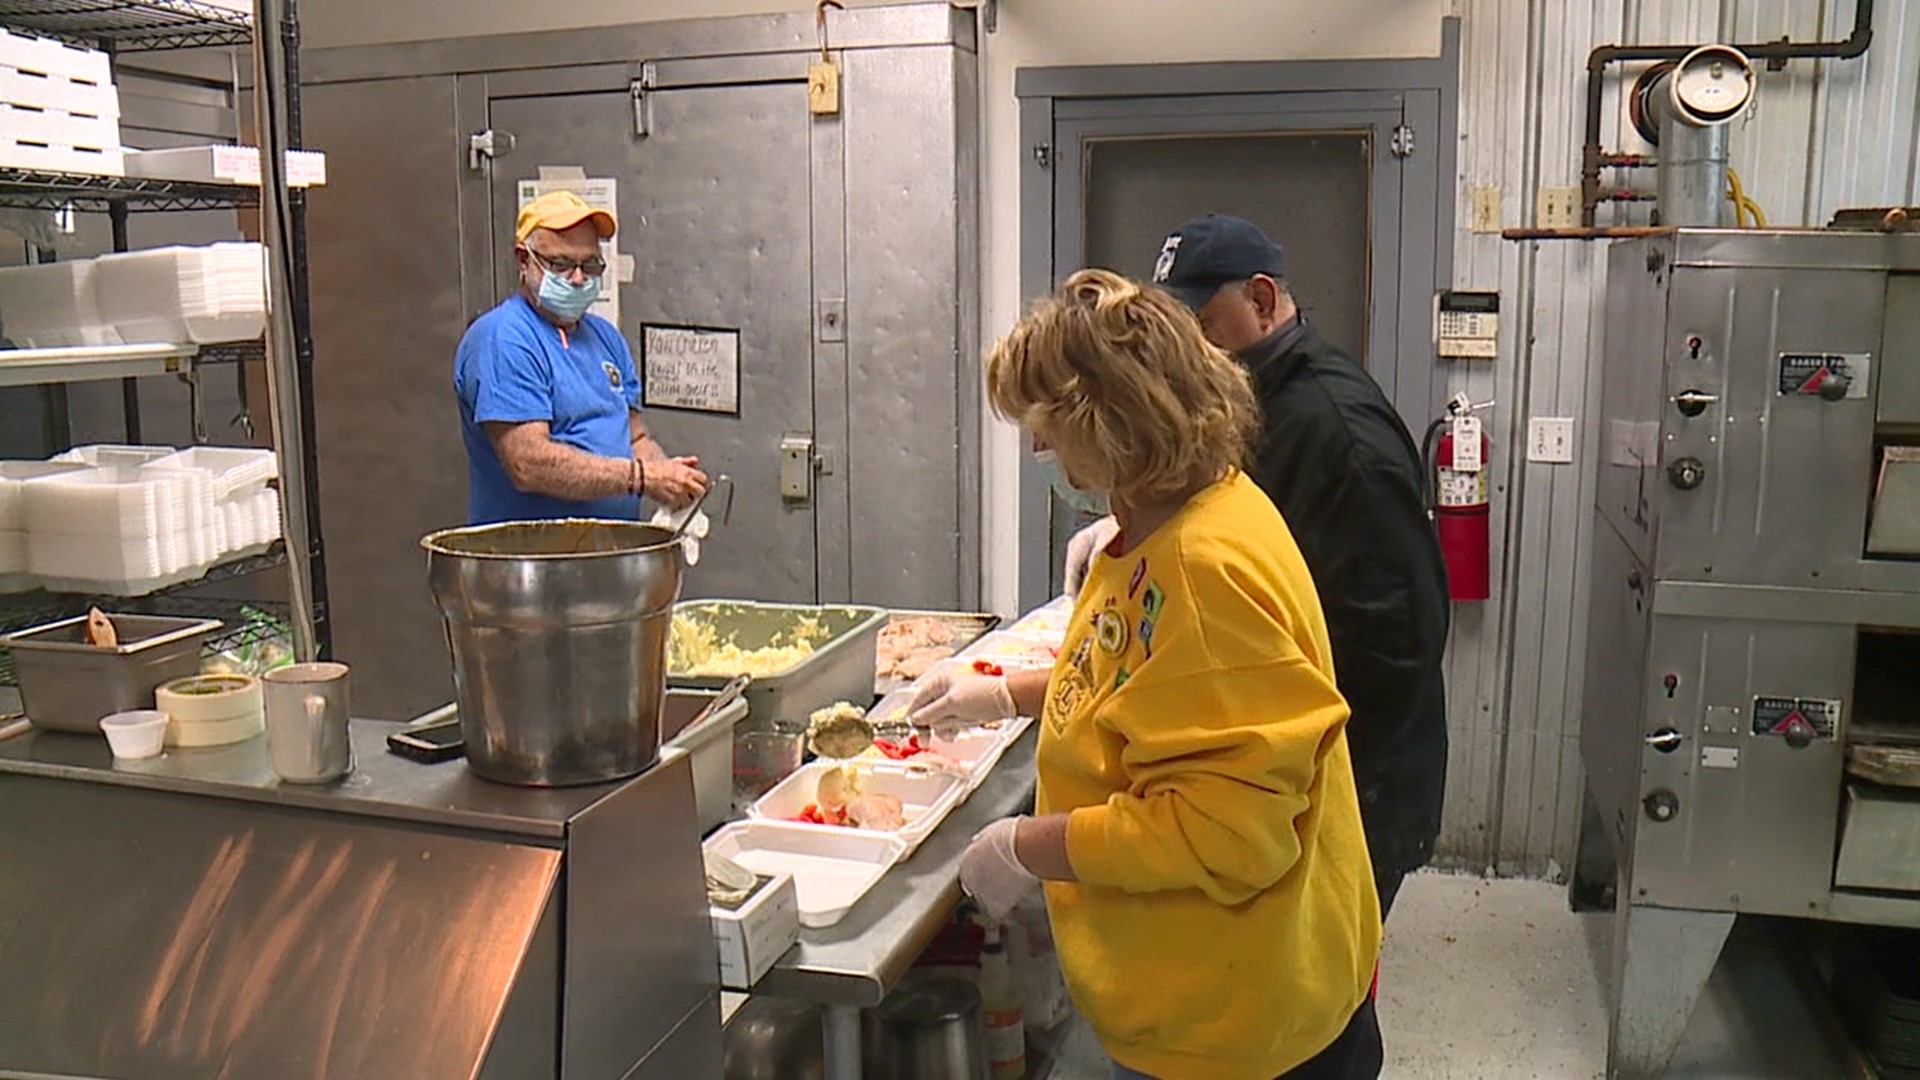 Newswatch 16 stopped by the Carbondale YMCA and the Eynon Archbald Lions Club where the holiday feast was on.